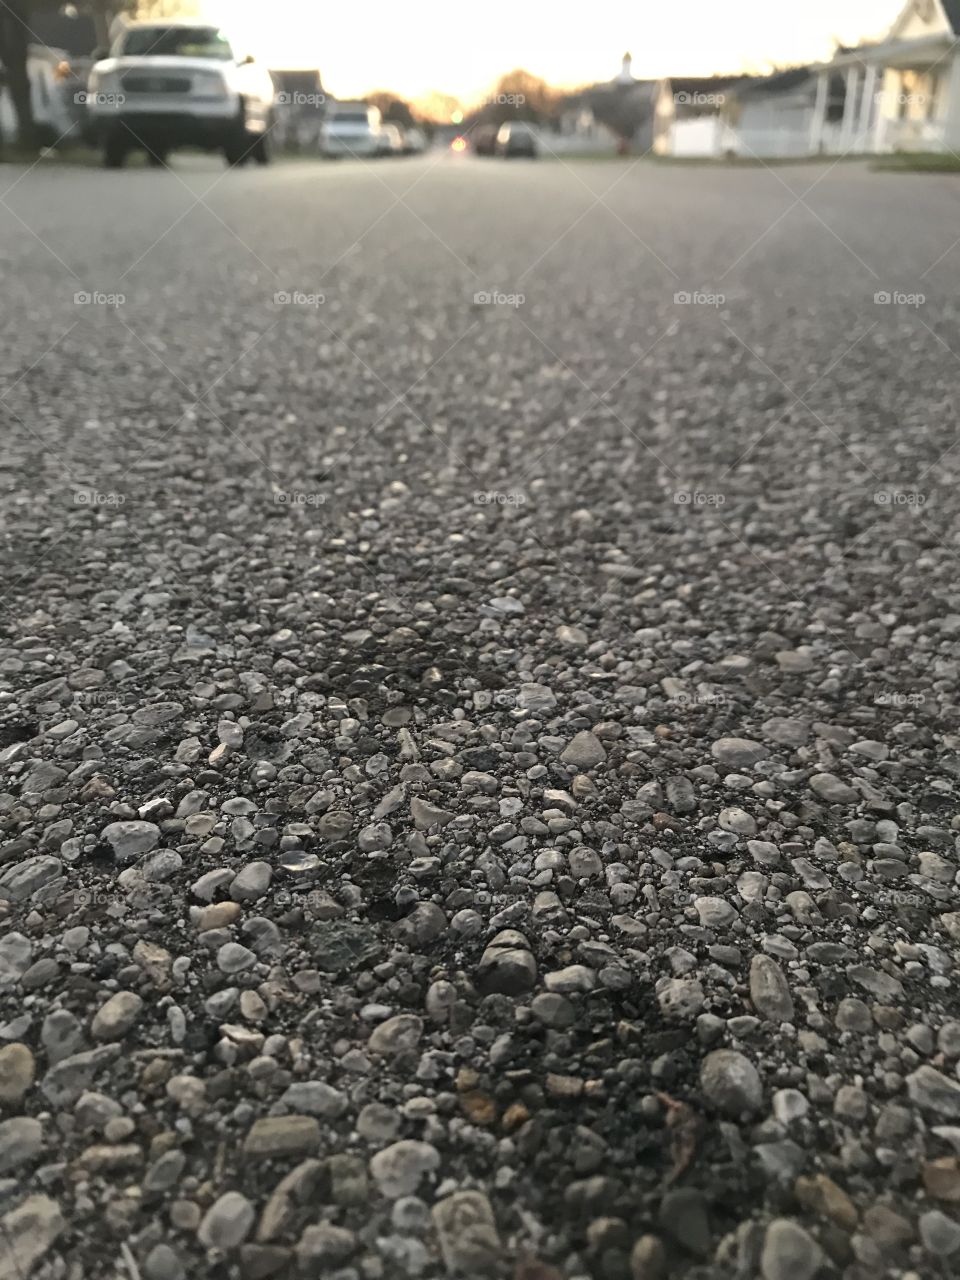 Gravel/ road picture.  subtle and calm in focus on the road not back 